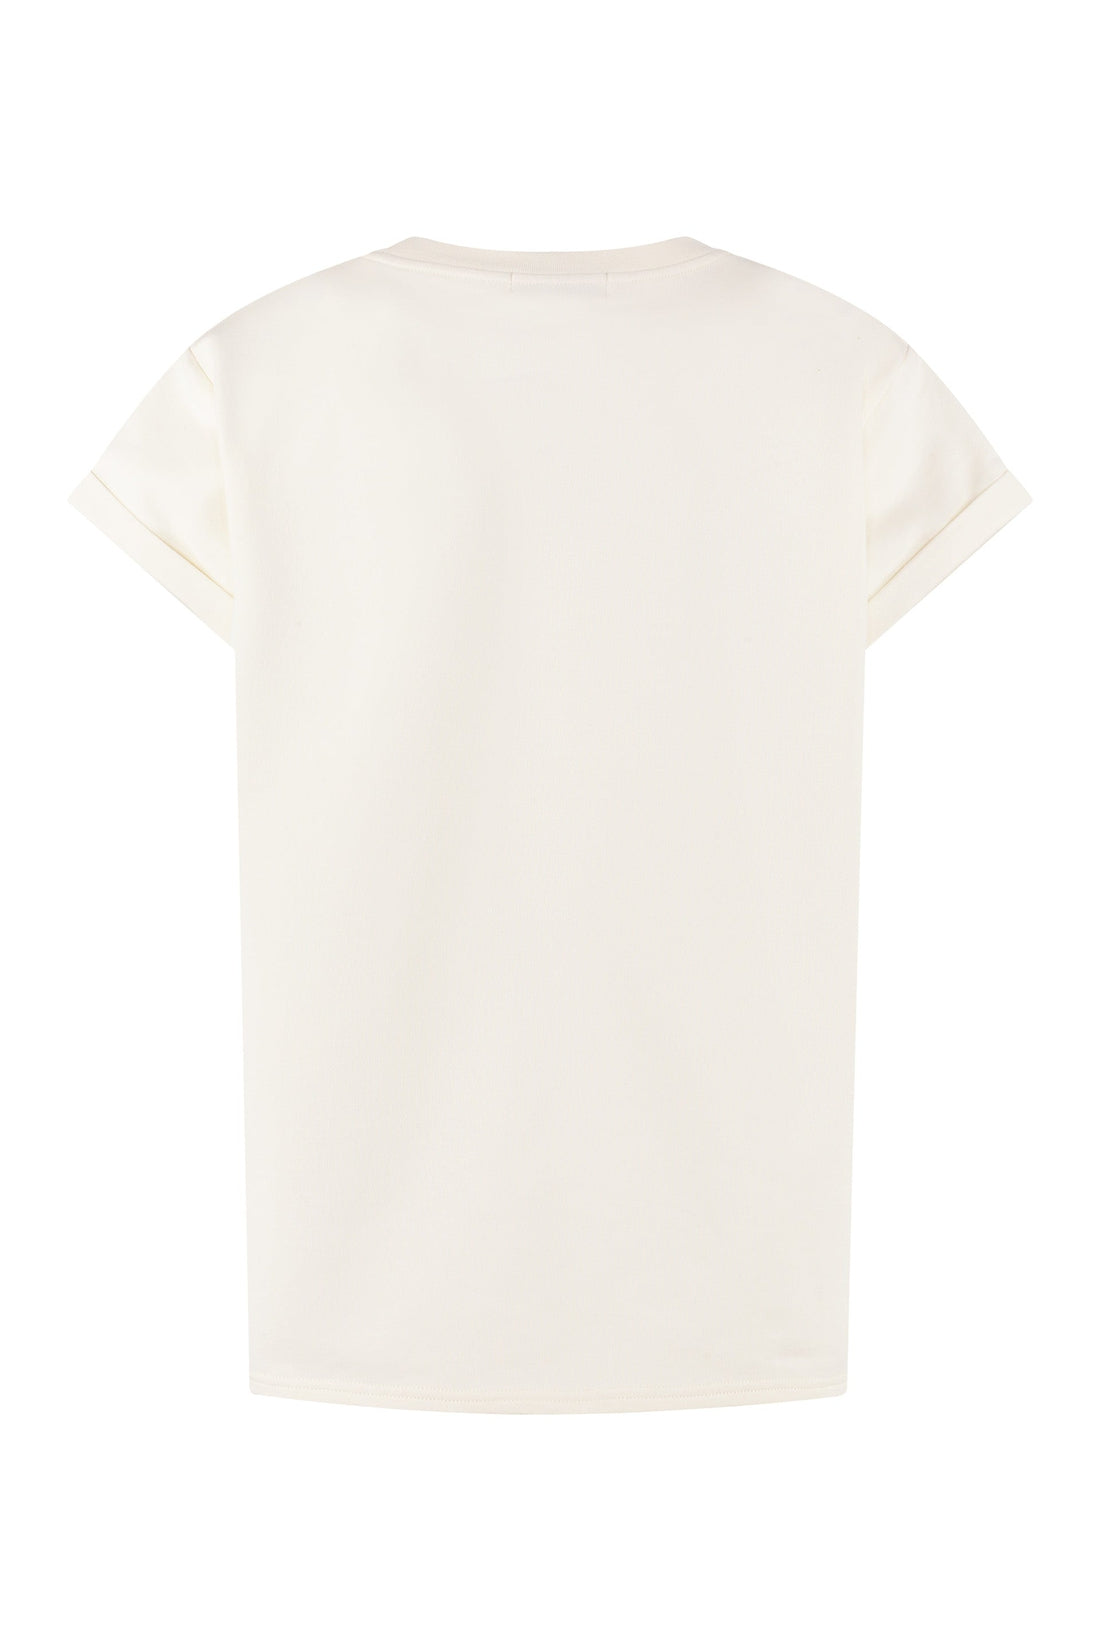 Rodebjer-OUTLET-SALE-Nora cotton T-shirt-ARCHIVIST